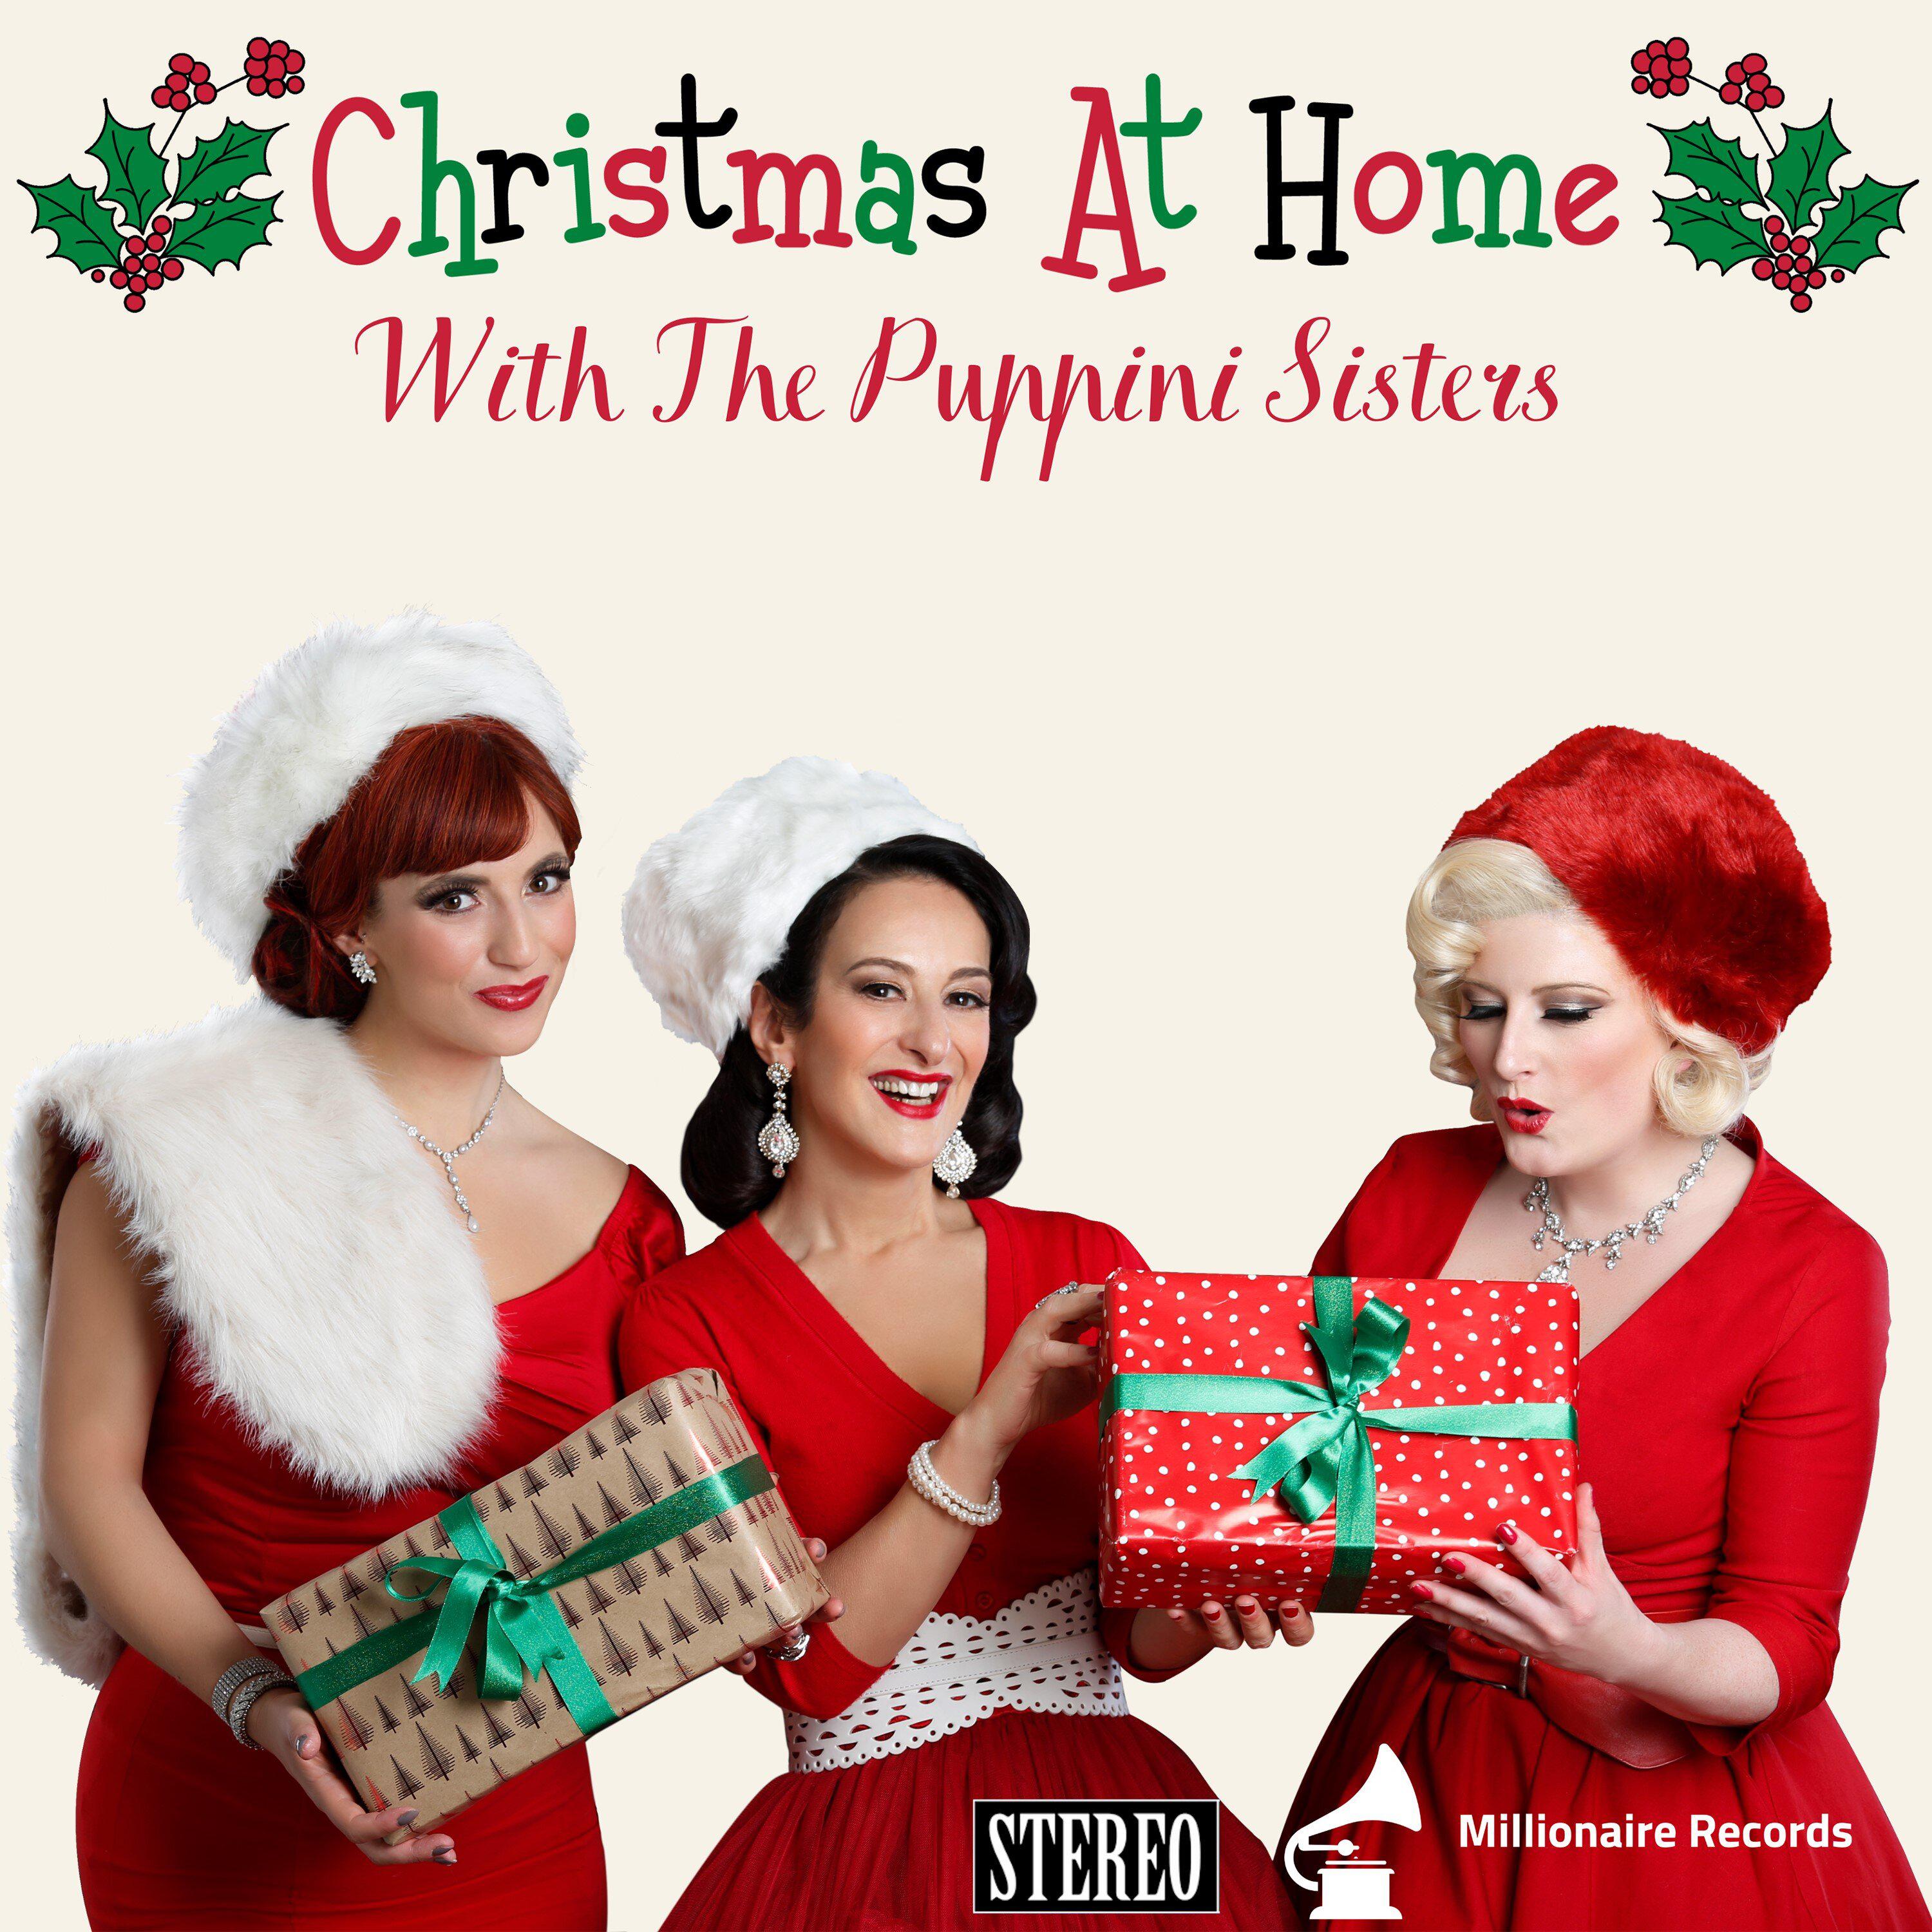 The Puppini Sisters - The Boogie Woogie Bugle Boy (From Company B)